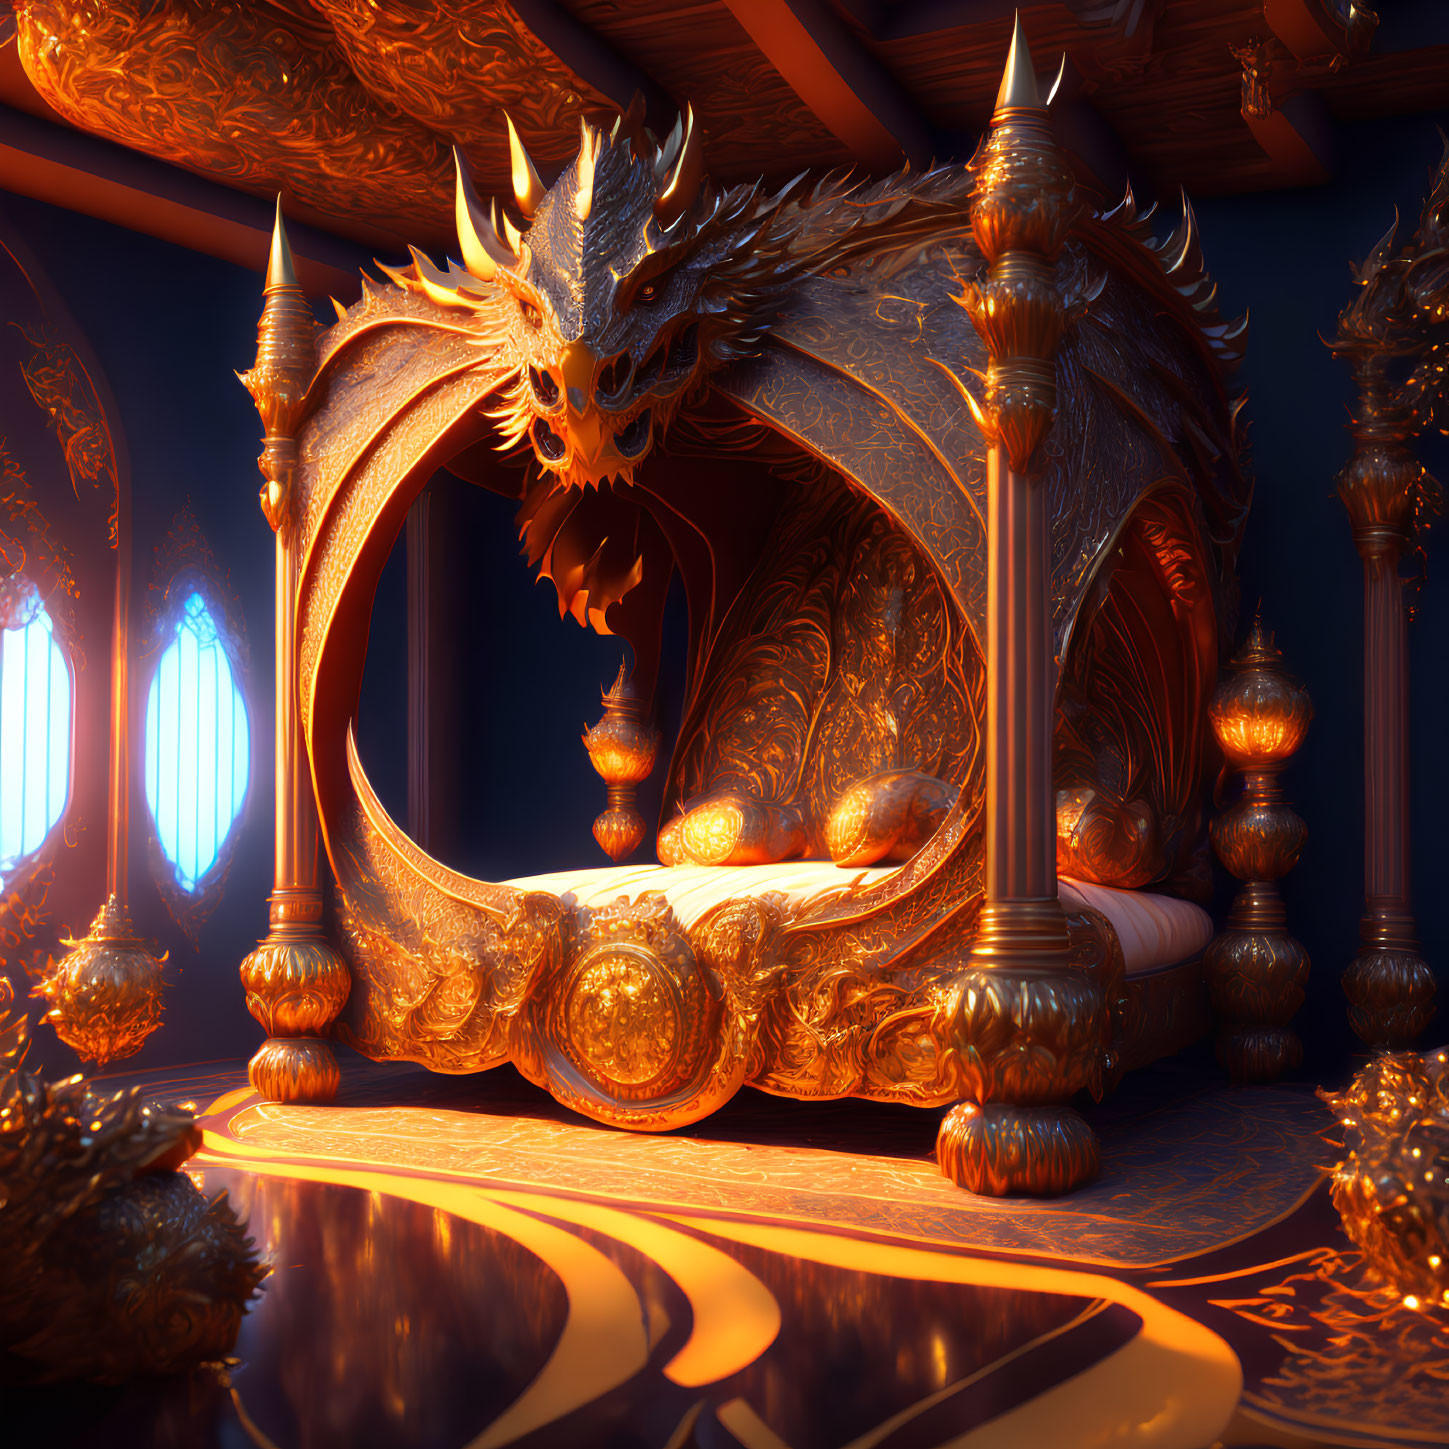 Luxurious Golden Dragon-Themed Bed in Opulent Room